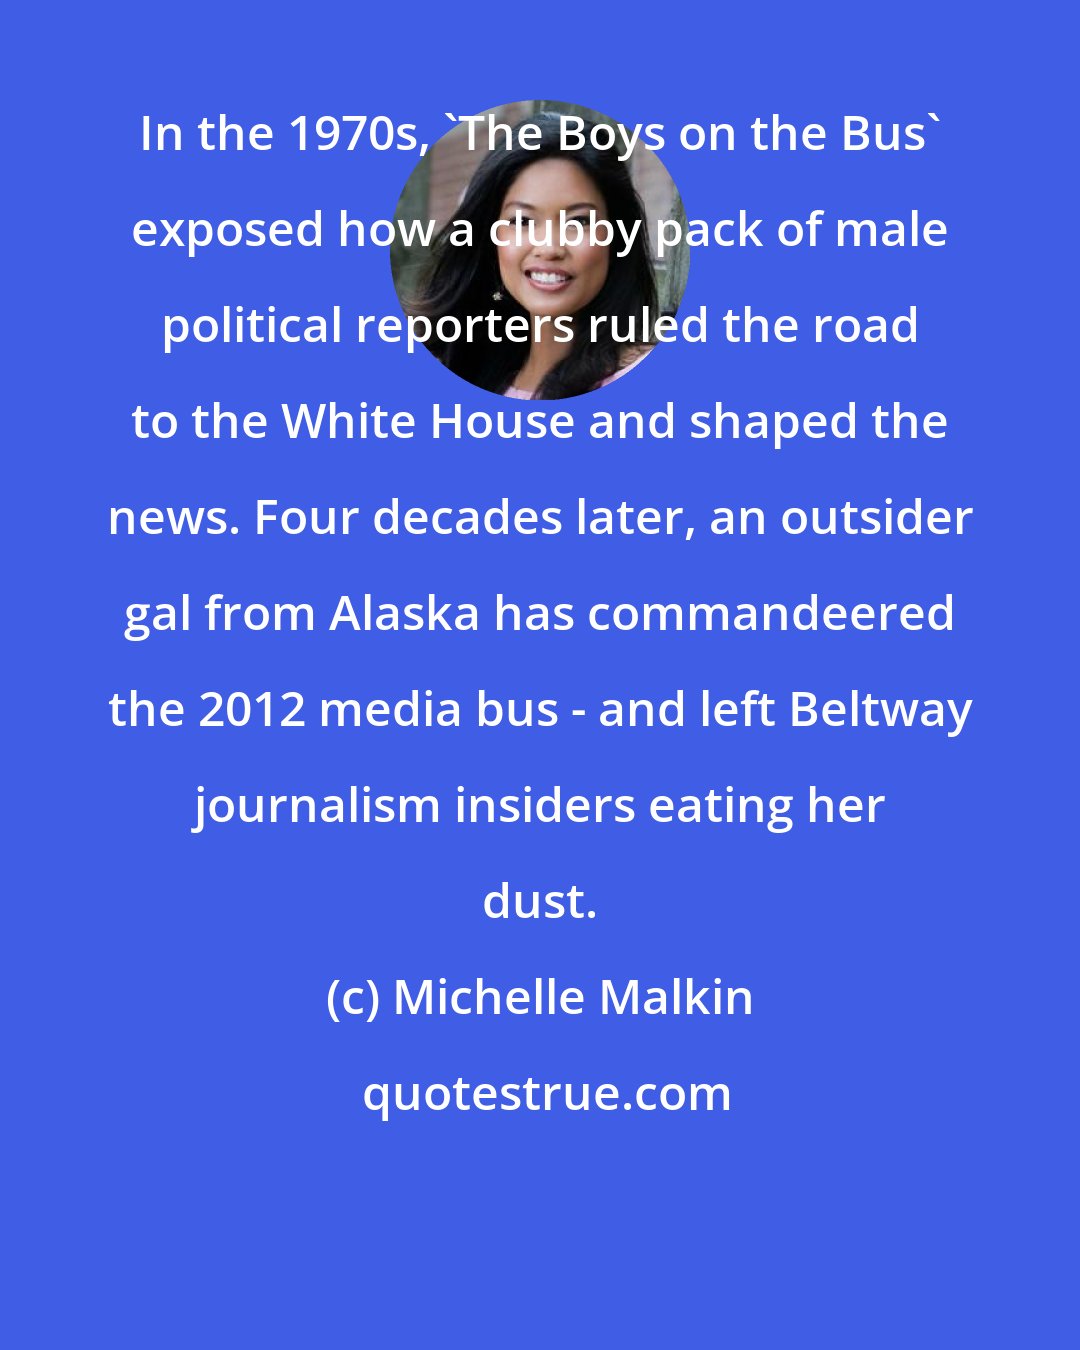 Michelle Malkin: In the 1970s, 'The Boys on the Bus' exposed how a clubby pack of male political reporters ruled the road to the White House and shaped the news. Four decades later, an outsider gal from Alaska has commandeered the 2012 media bus - and left Beltway journalism insiders eating her dust.